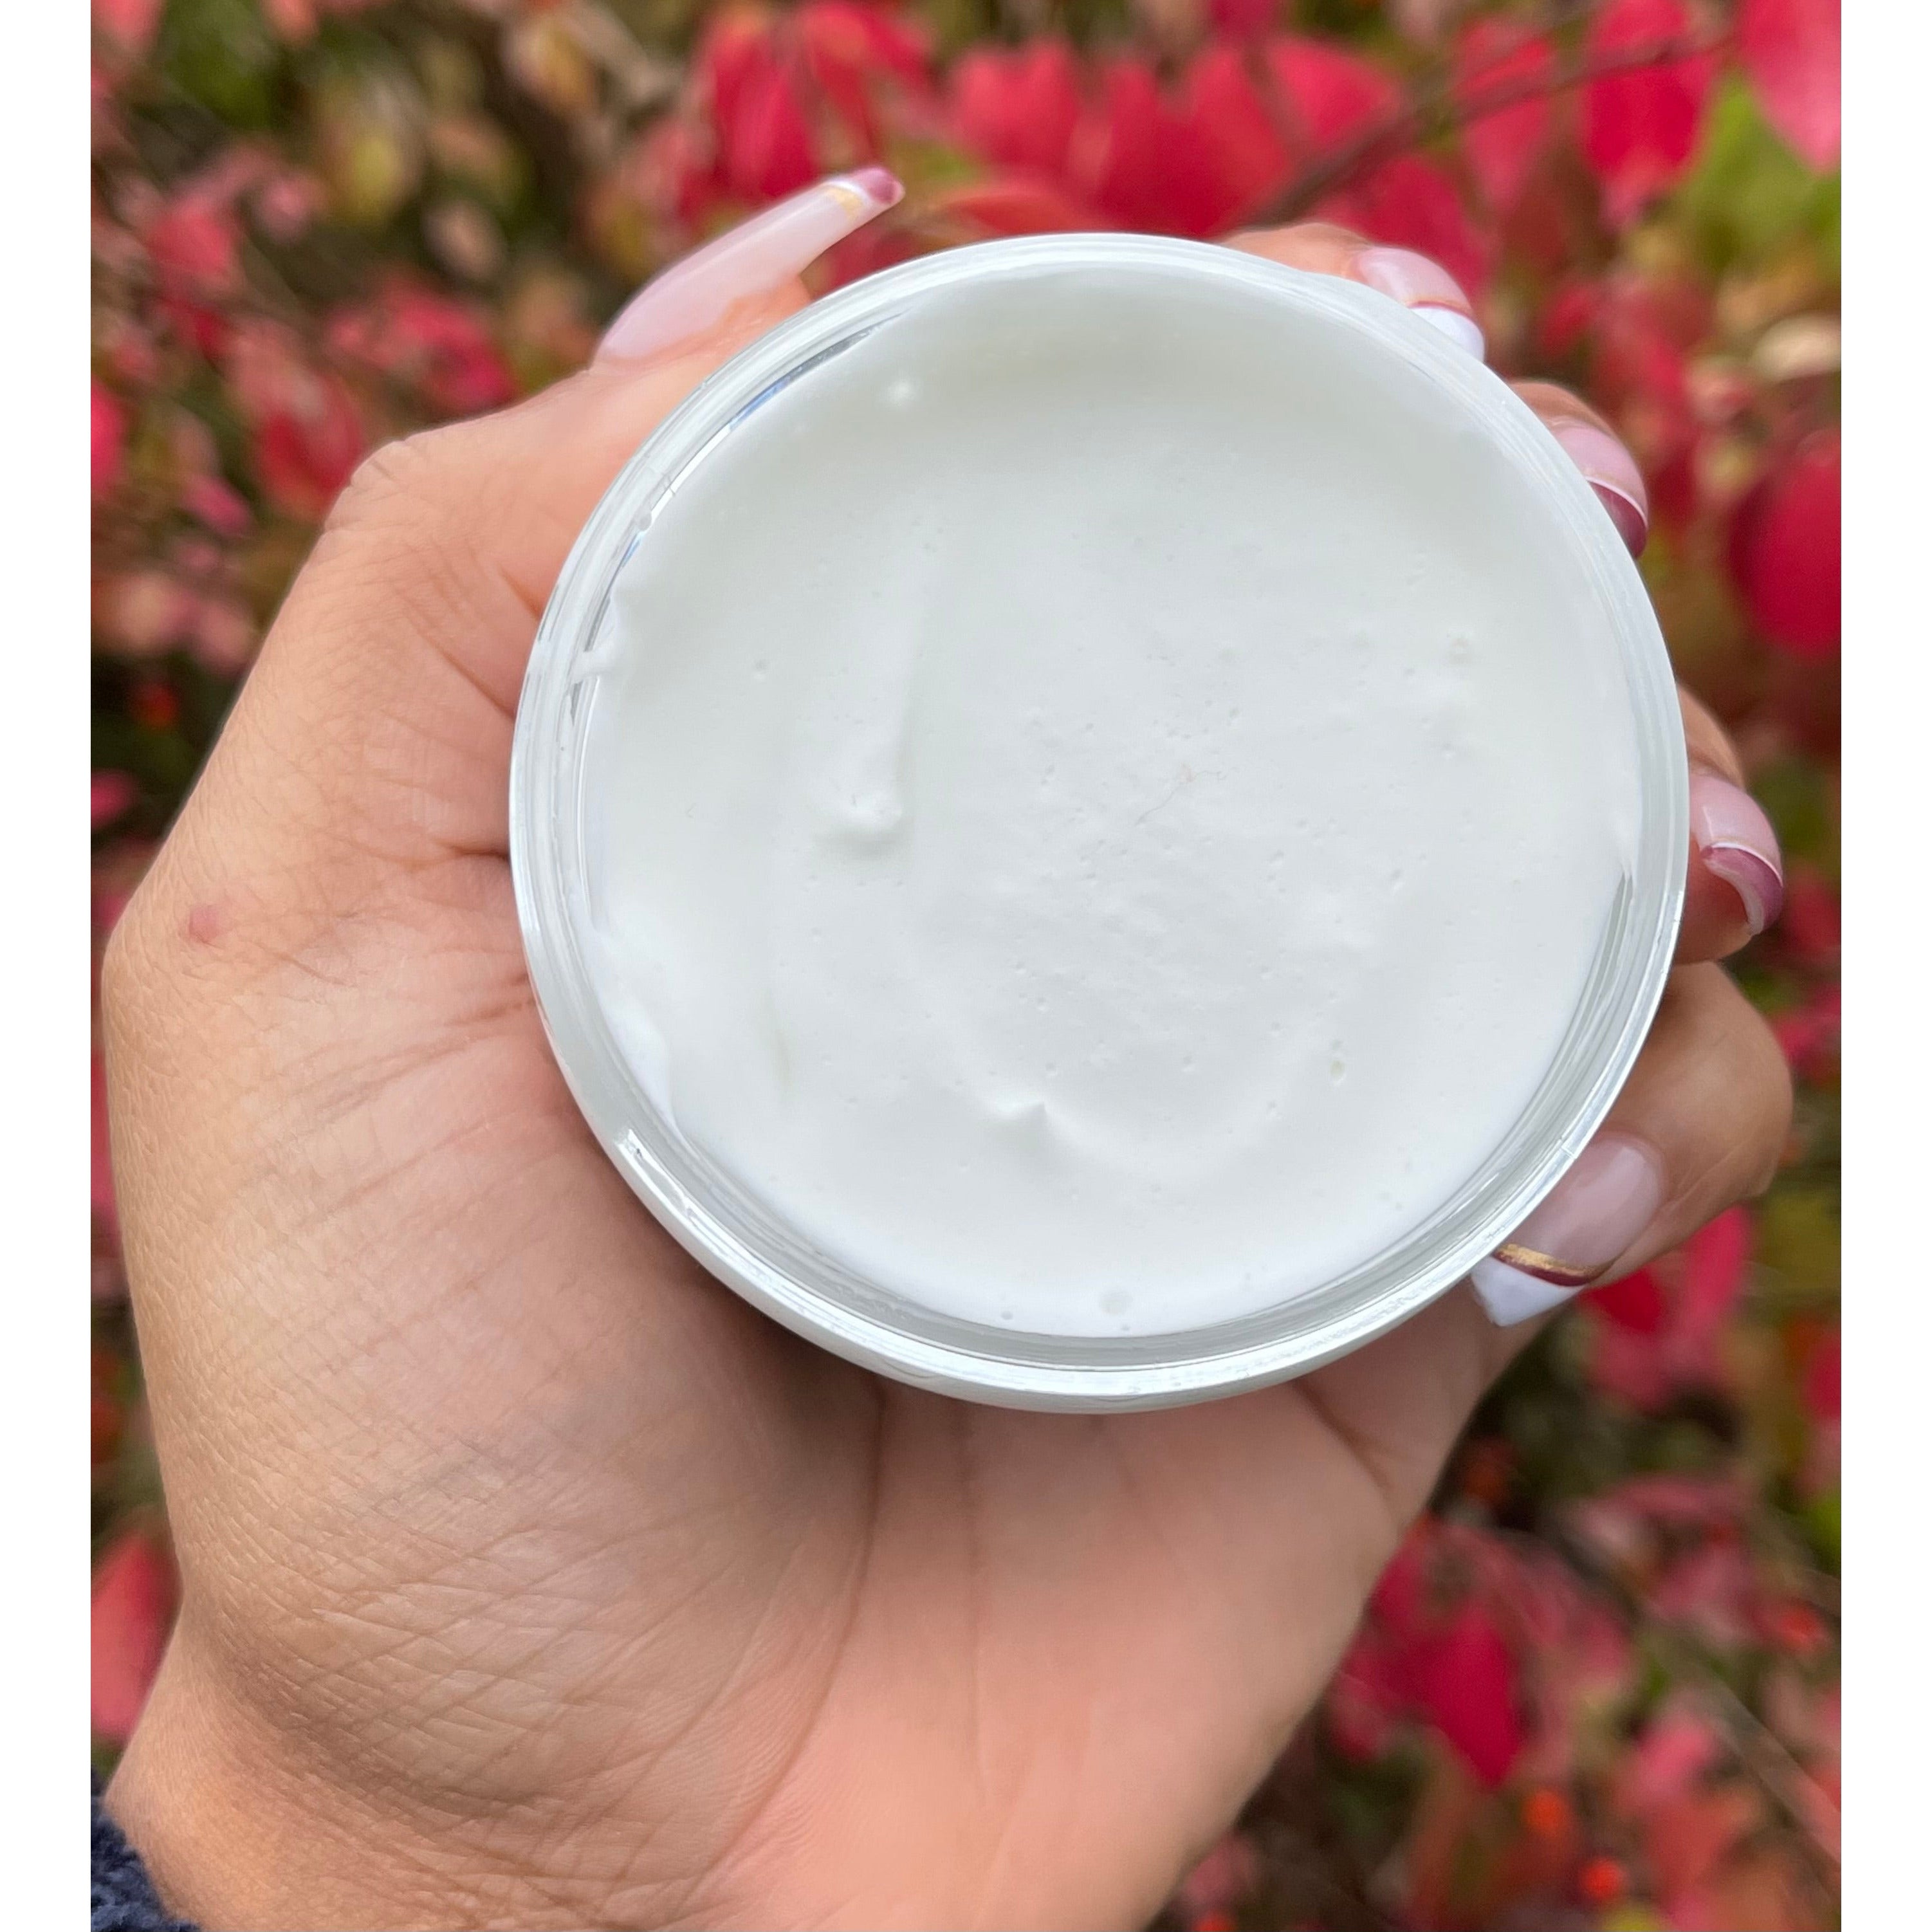 Unscented Body Butter - Discontinuing